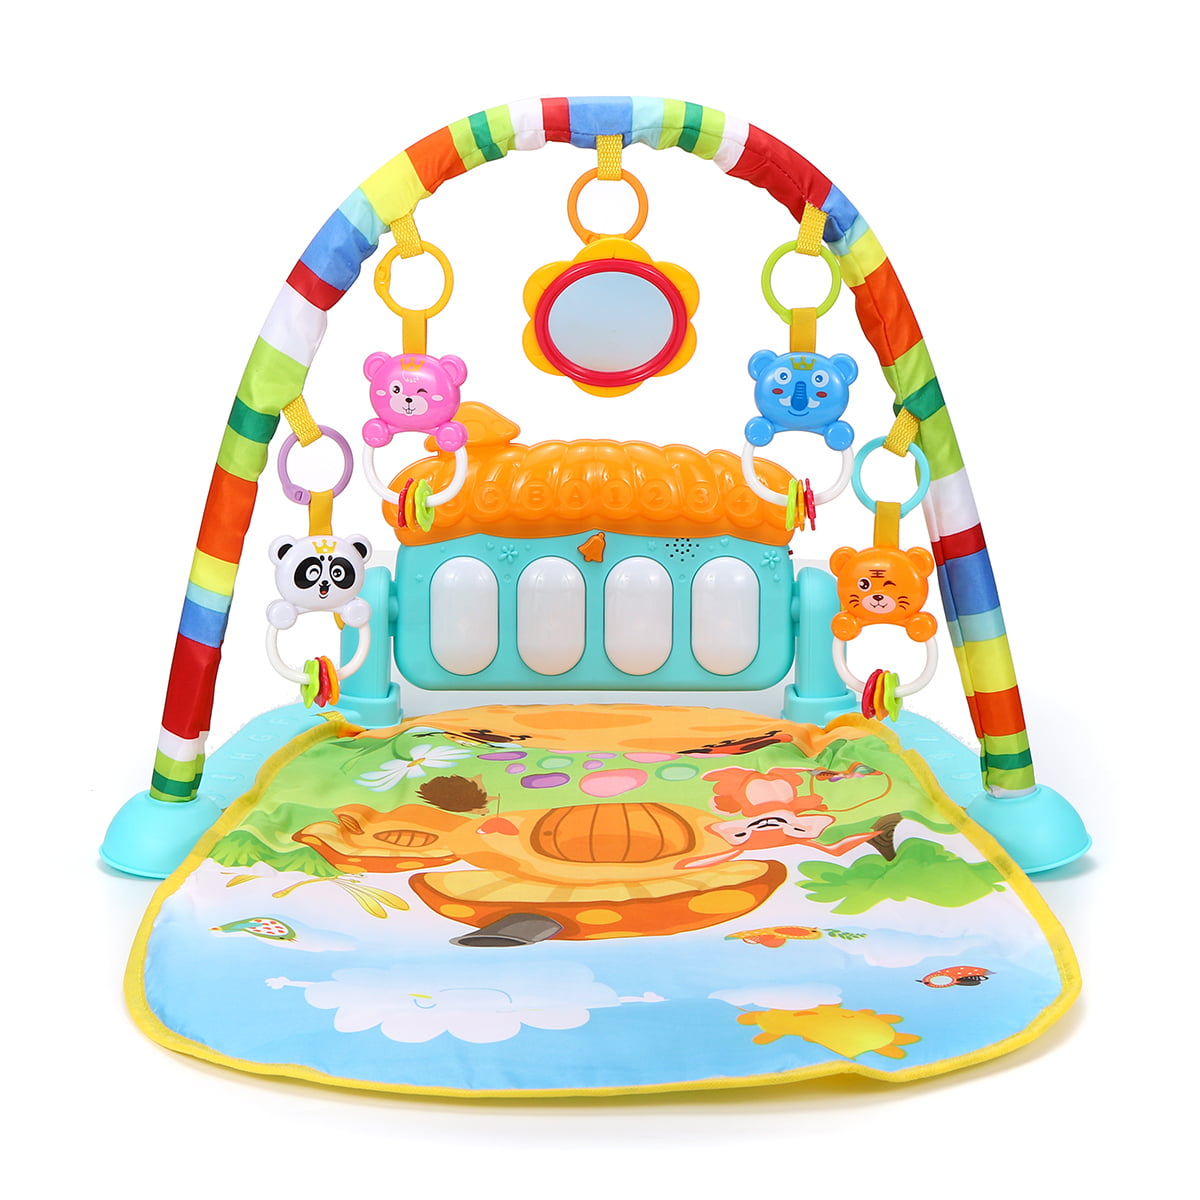 Howardee Baby Play Mat Gym Fitness Music Lights Fun Piano Boy Girl Fitness Rack Early Education 